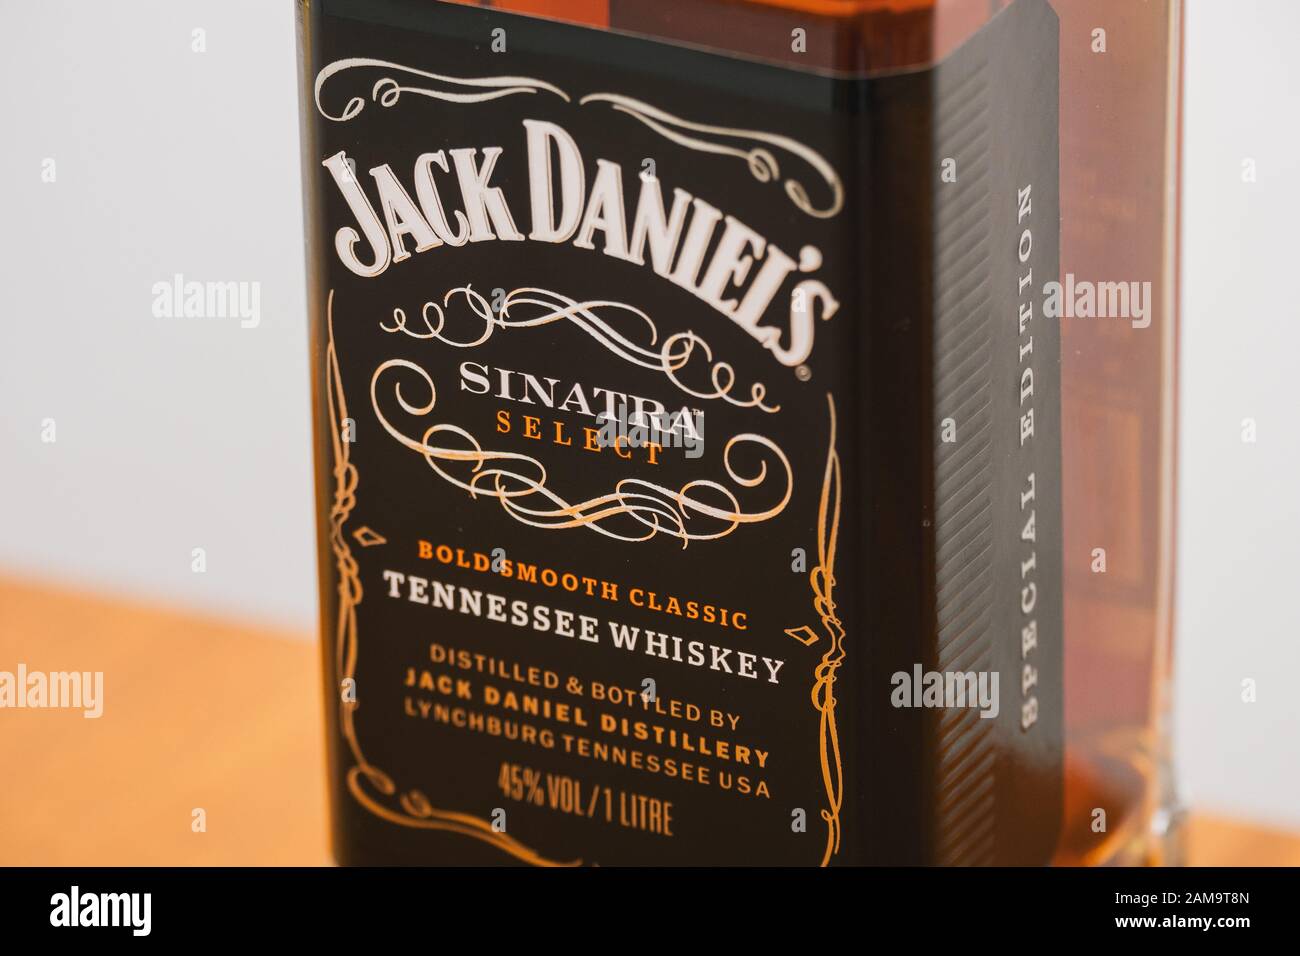 Lynchburg, Tennessee, USA - January 11 2020: Jack Daniels Sinatra Select Tennessee Whiskey Detail of the Label Stock Photo